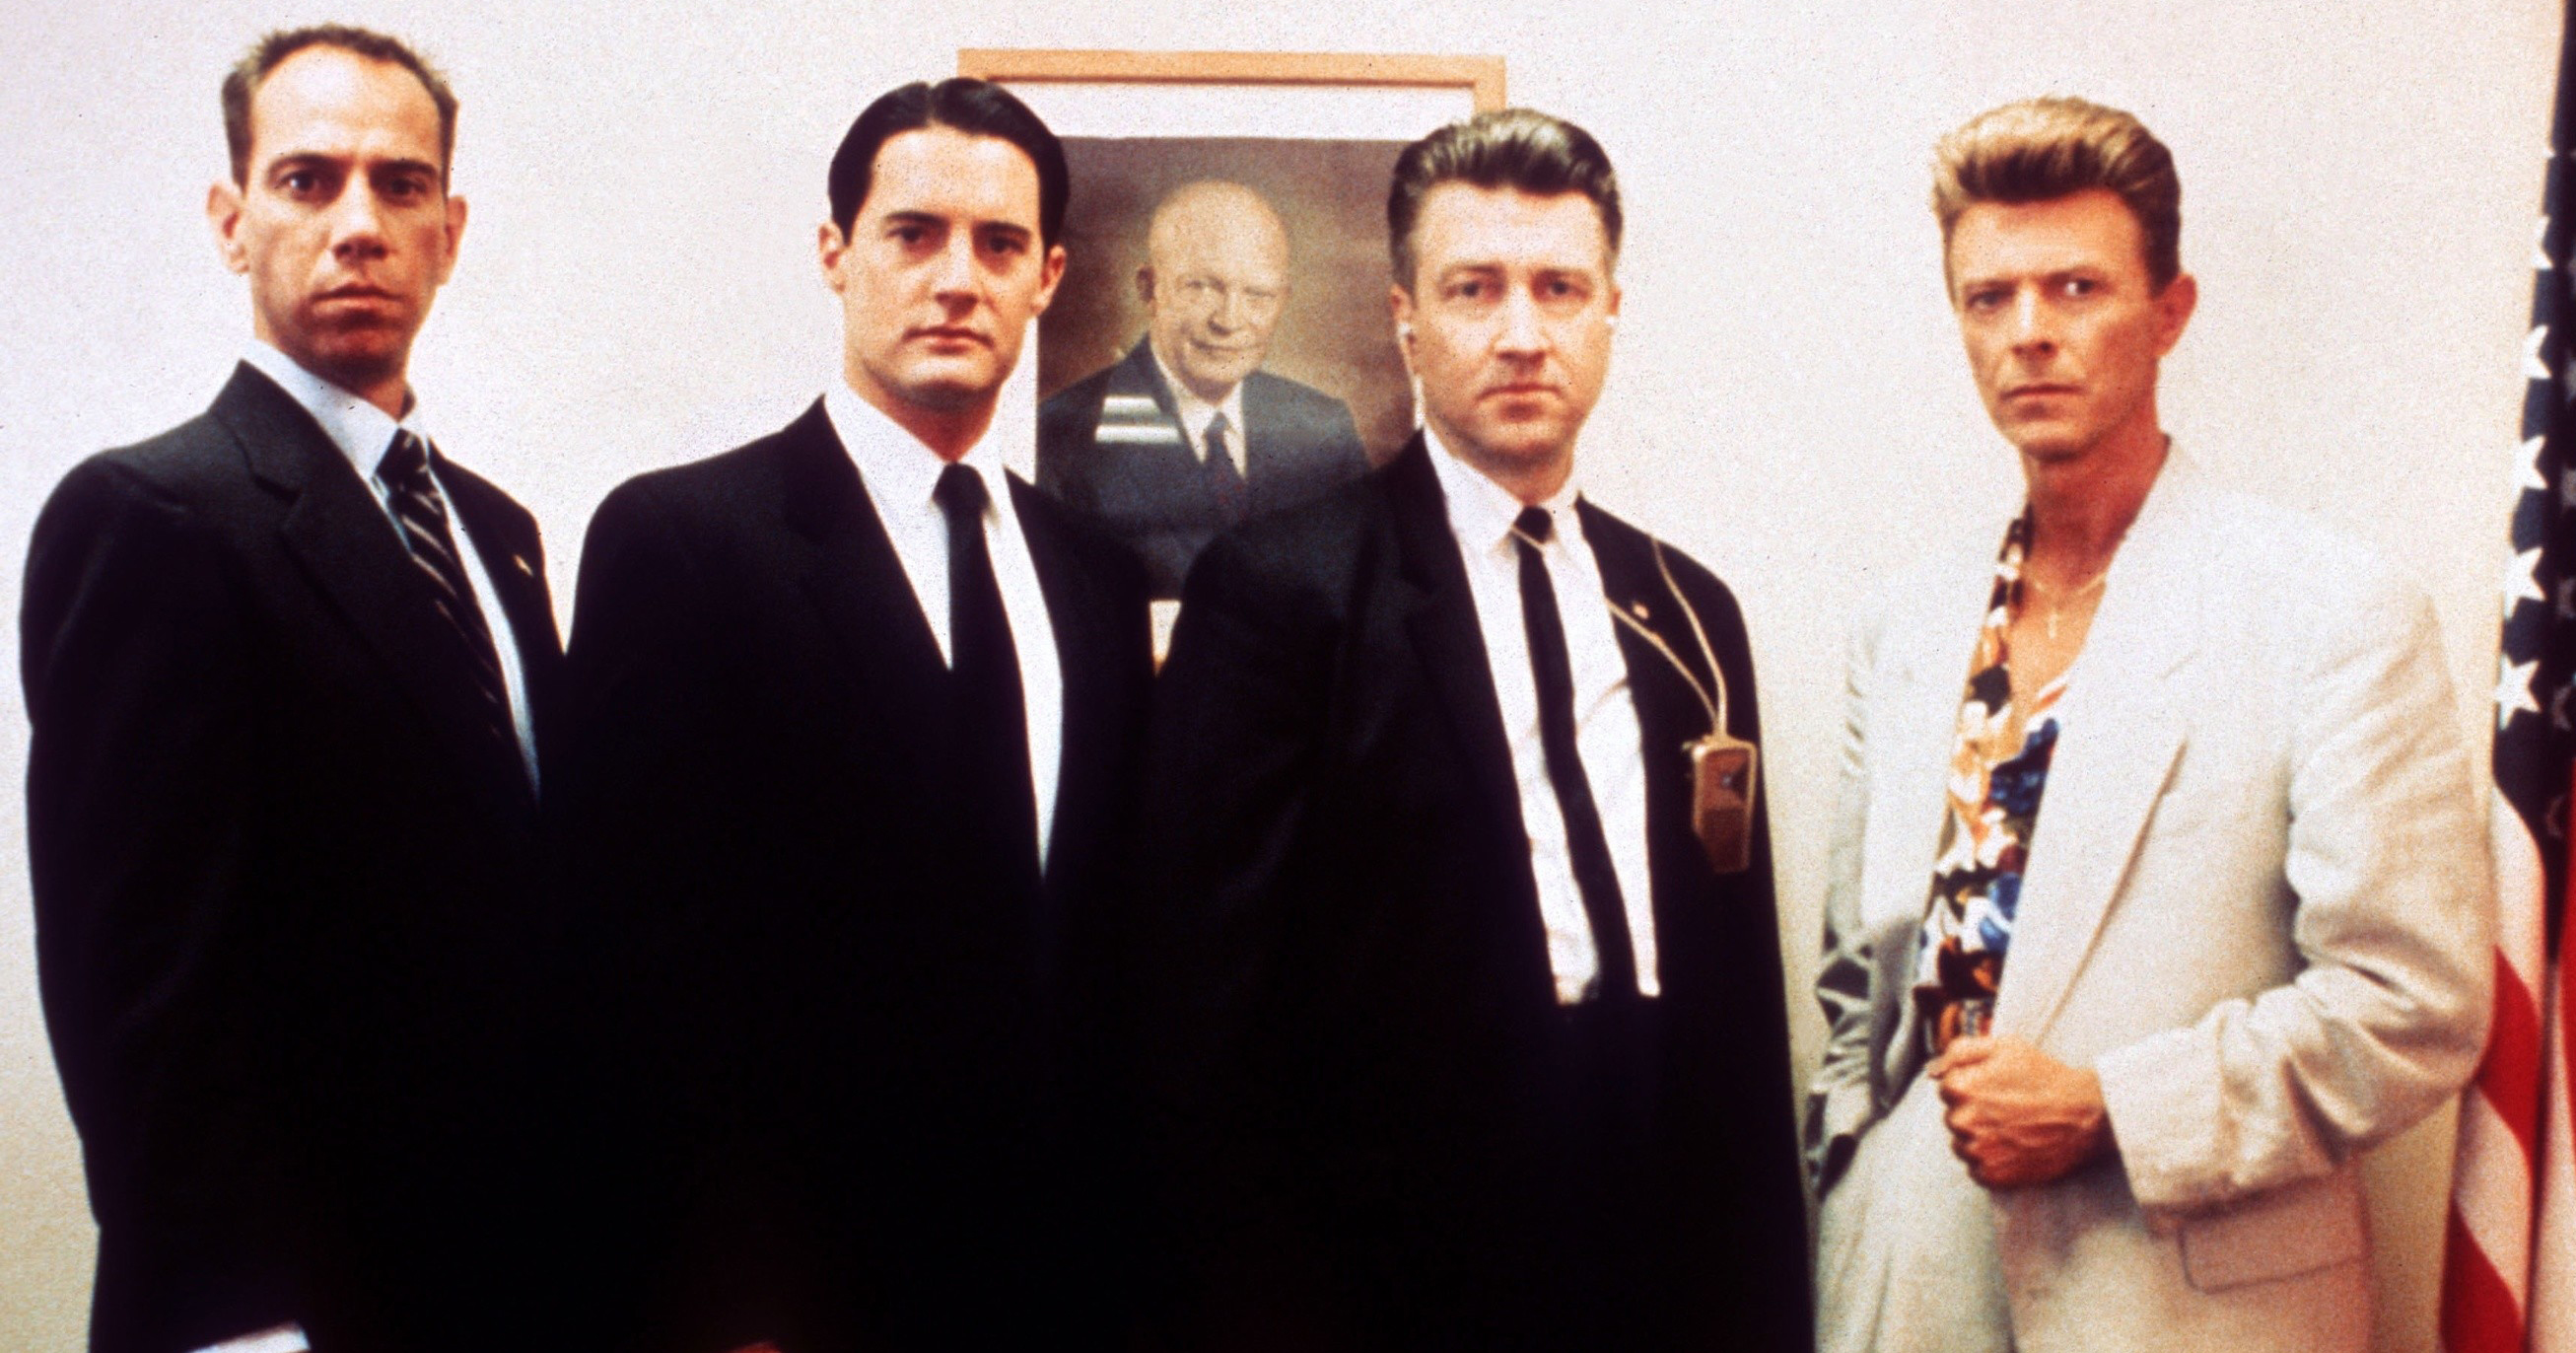 From left: Miguel Ferrer, Kyle MacLachlan, David Lynch, and David Bowie on the set of <i>Twin Peaks: Fire Walk with Me</i> in 1991. (Mary Evans—New Line Cinema/Courtesy Everett Collection)